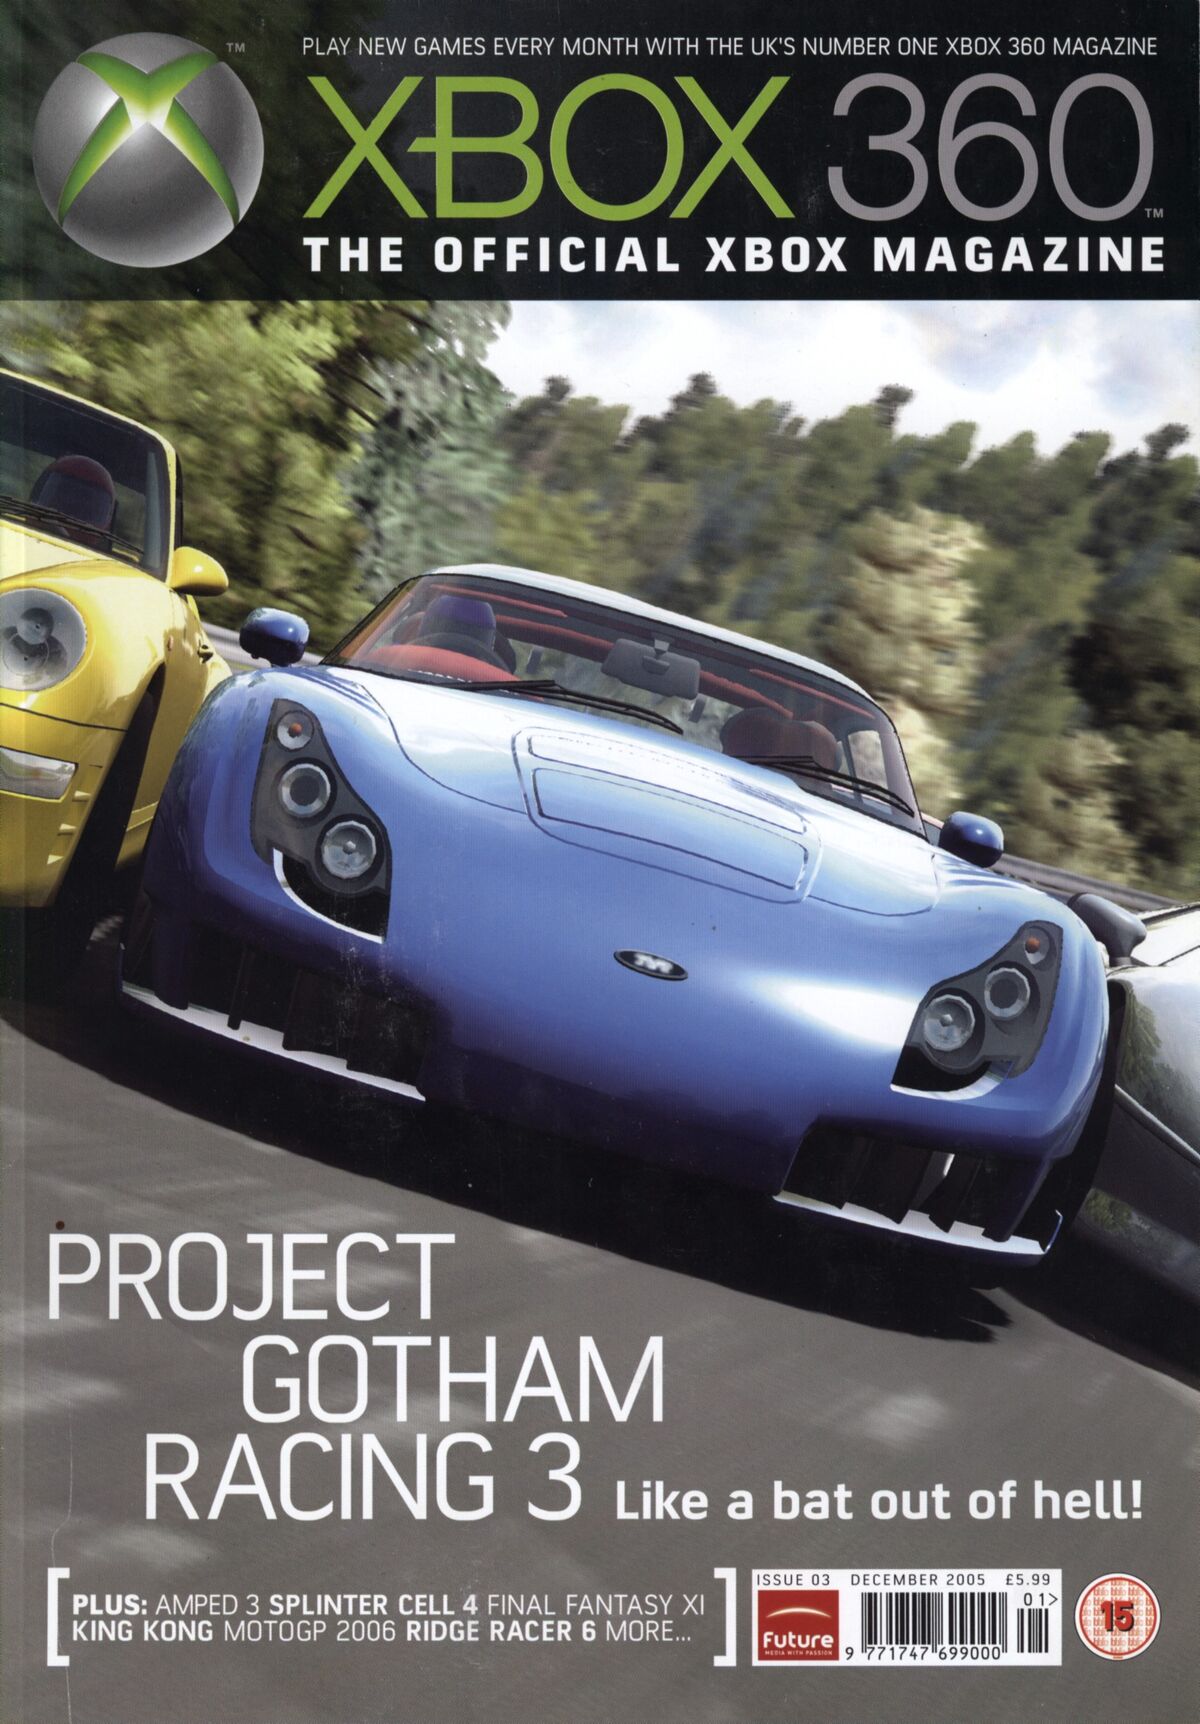 Forza Motorsport 5 Xbox One Car Racing Video Game Art 2013 Print Ad/Poster